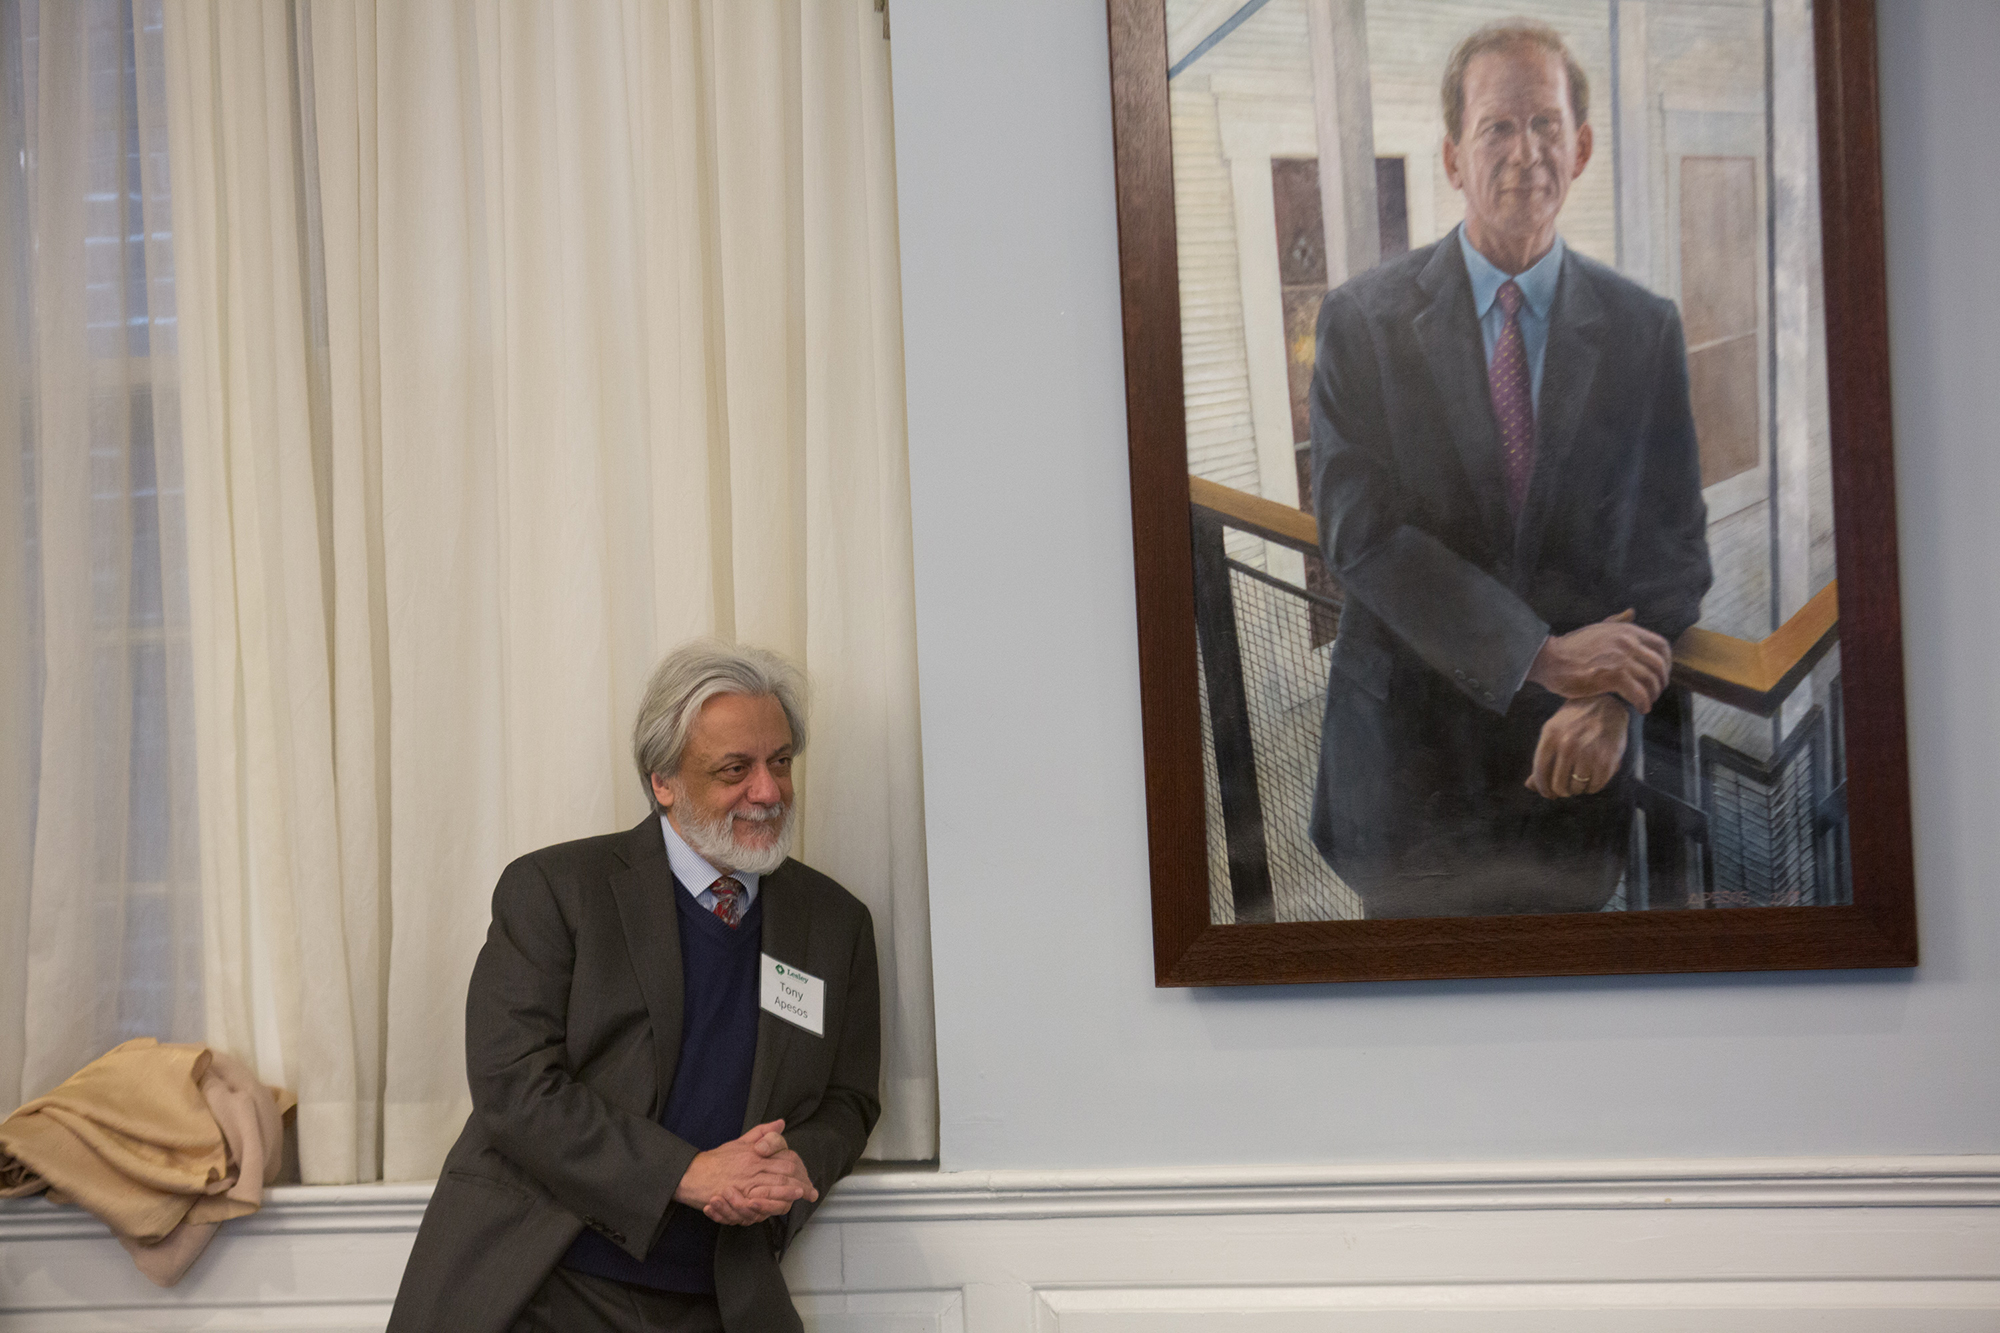 Tony Apesos leans against the Alumni Hall windowsill in the foreground of the portrait he painted of Joe Moore